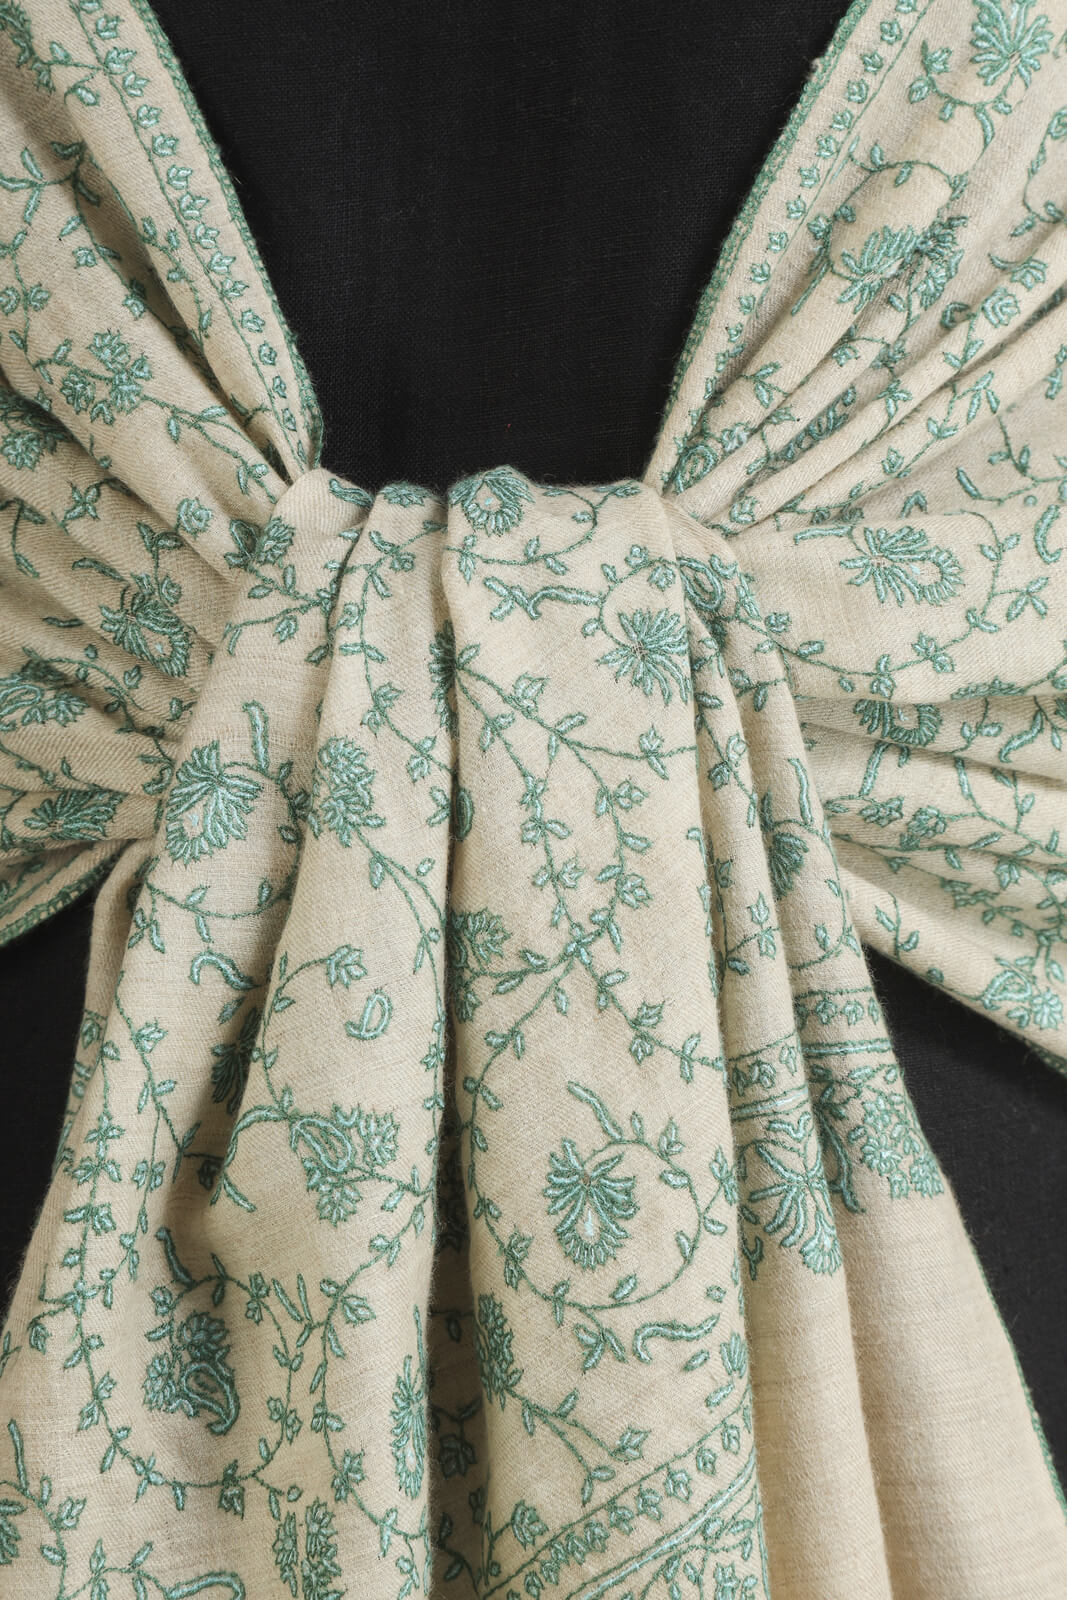 PASHMINA EMBROIDERY STOLE - Natural with Pastel Green Embroidery Sozni Pashmina Stole. Elevate your style with this exquisite addition to our collection of premium Pashmina stoles.